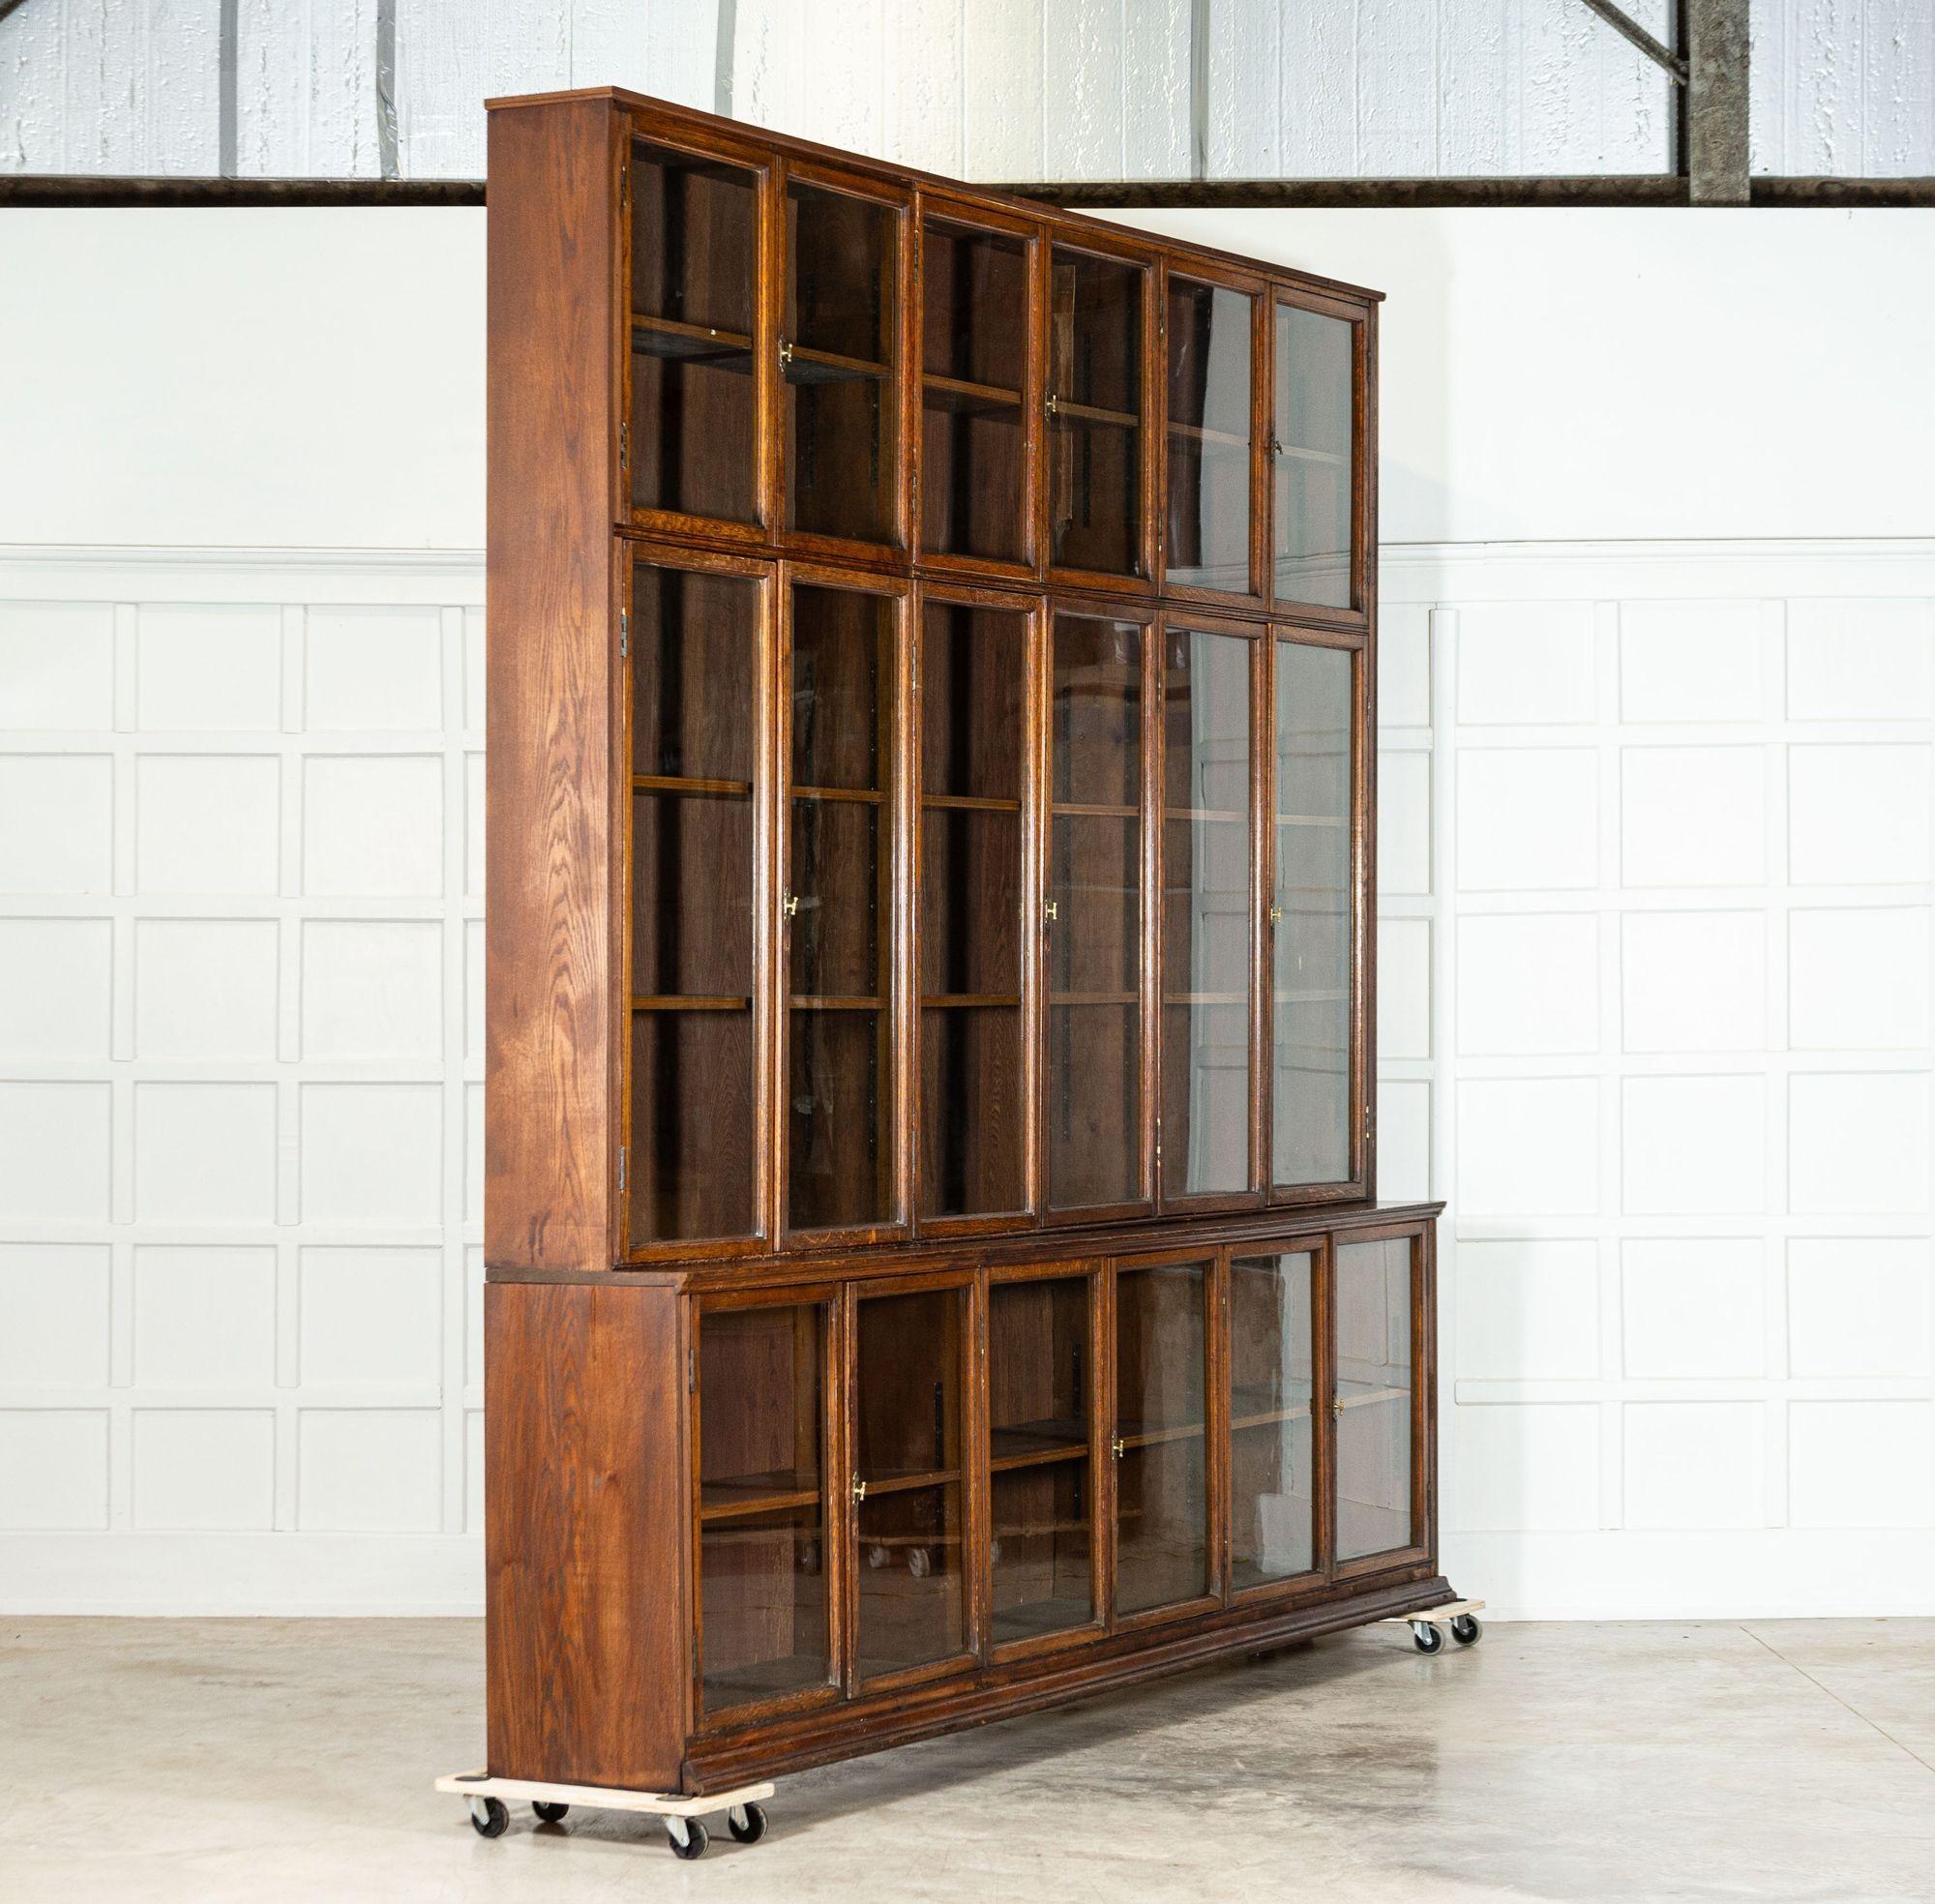 Monumental Oak Glazed Haberdashery Bookcase Cabinet In Good Condition For Sale In Staffordshire, GB